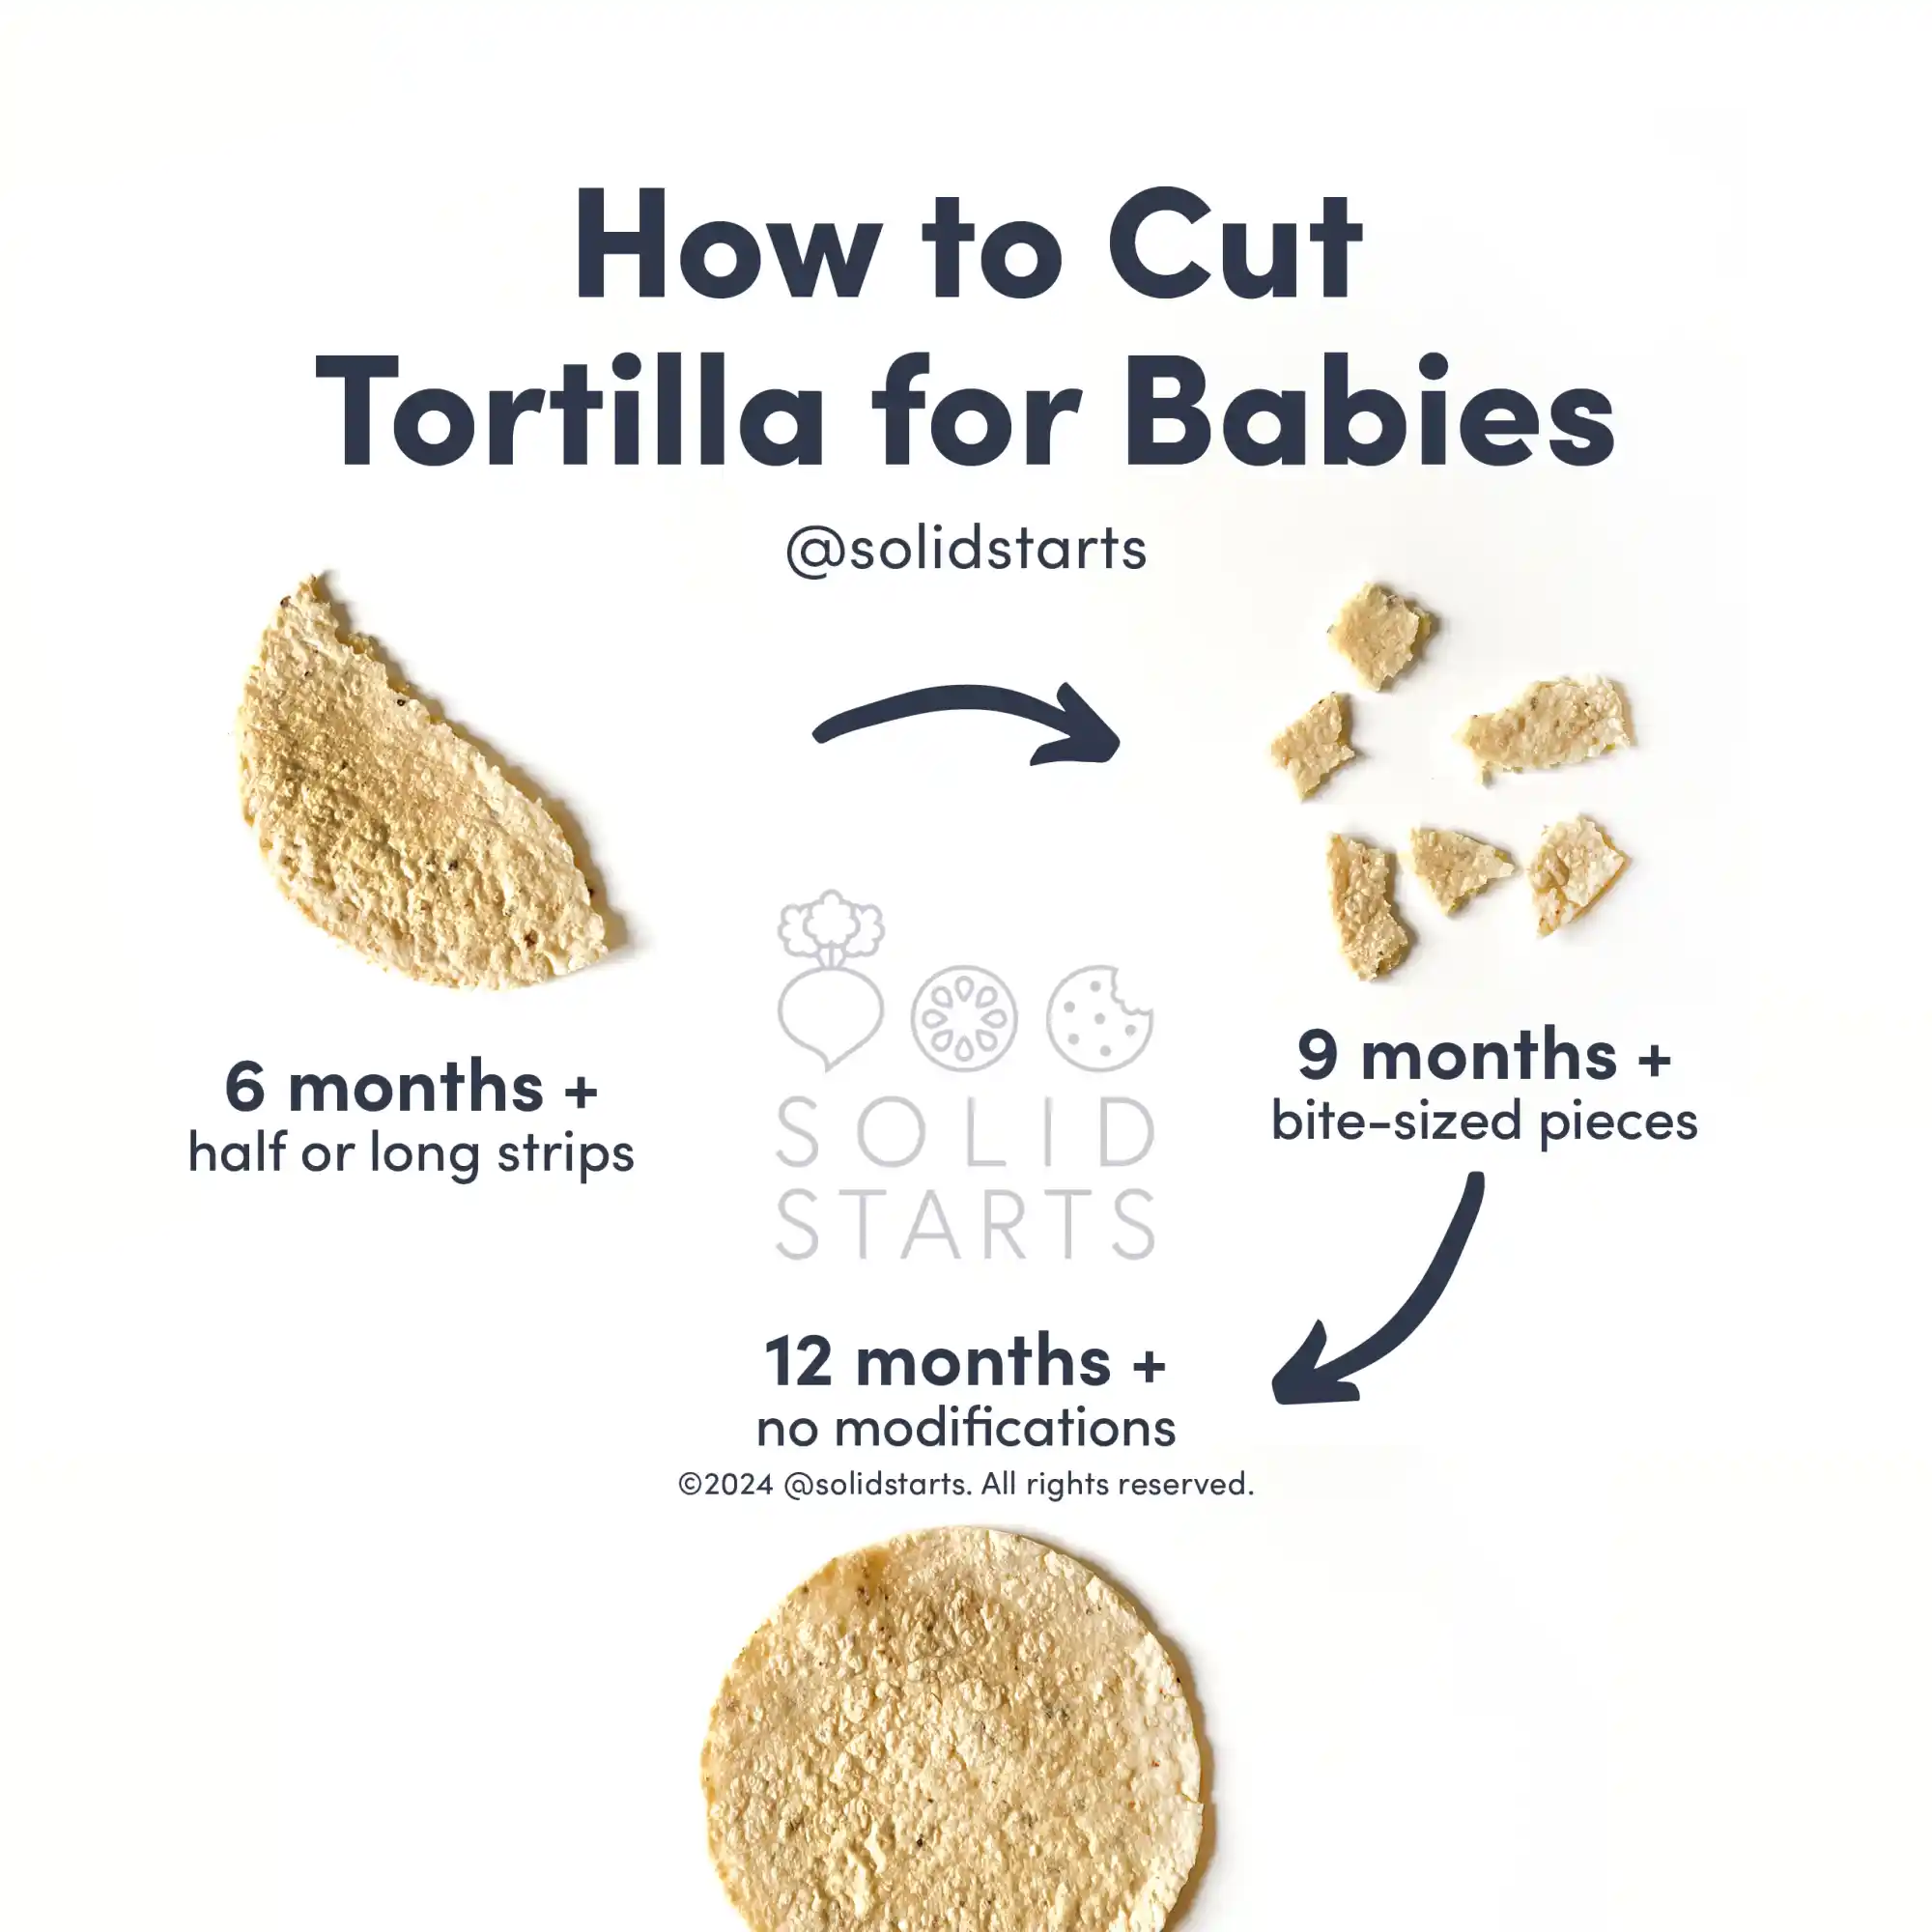 an infographic with the header "how to cut tortilla for babies": in half or long strips for 6 months+, bite-sized pieces for 9 months+, no modifications for 12 months+